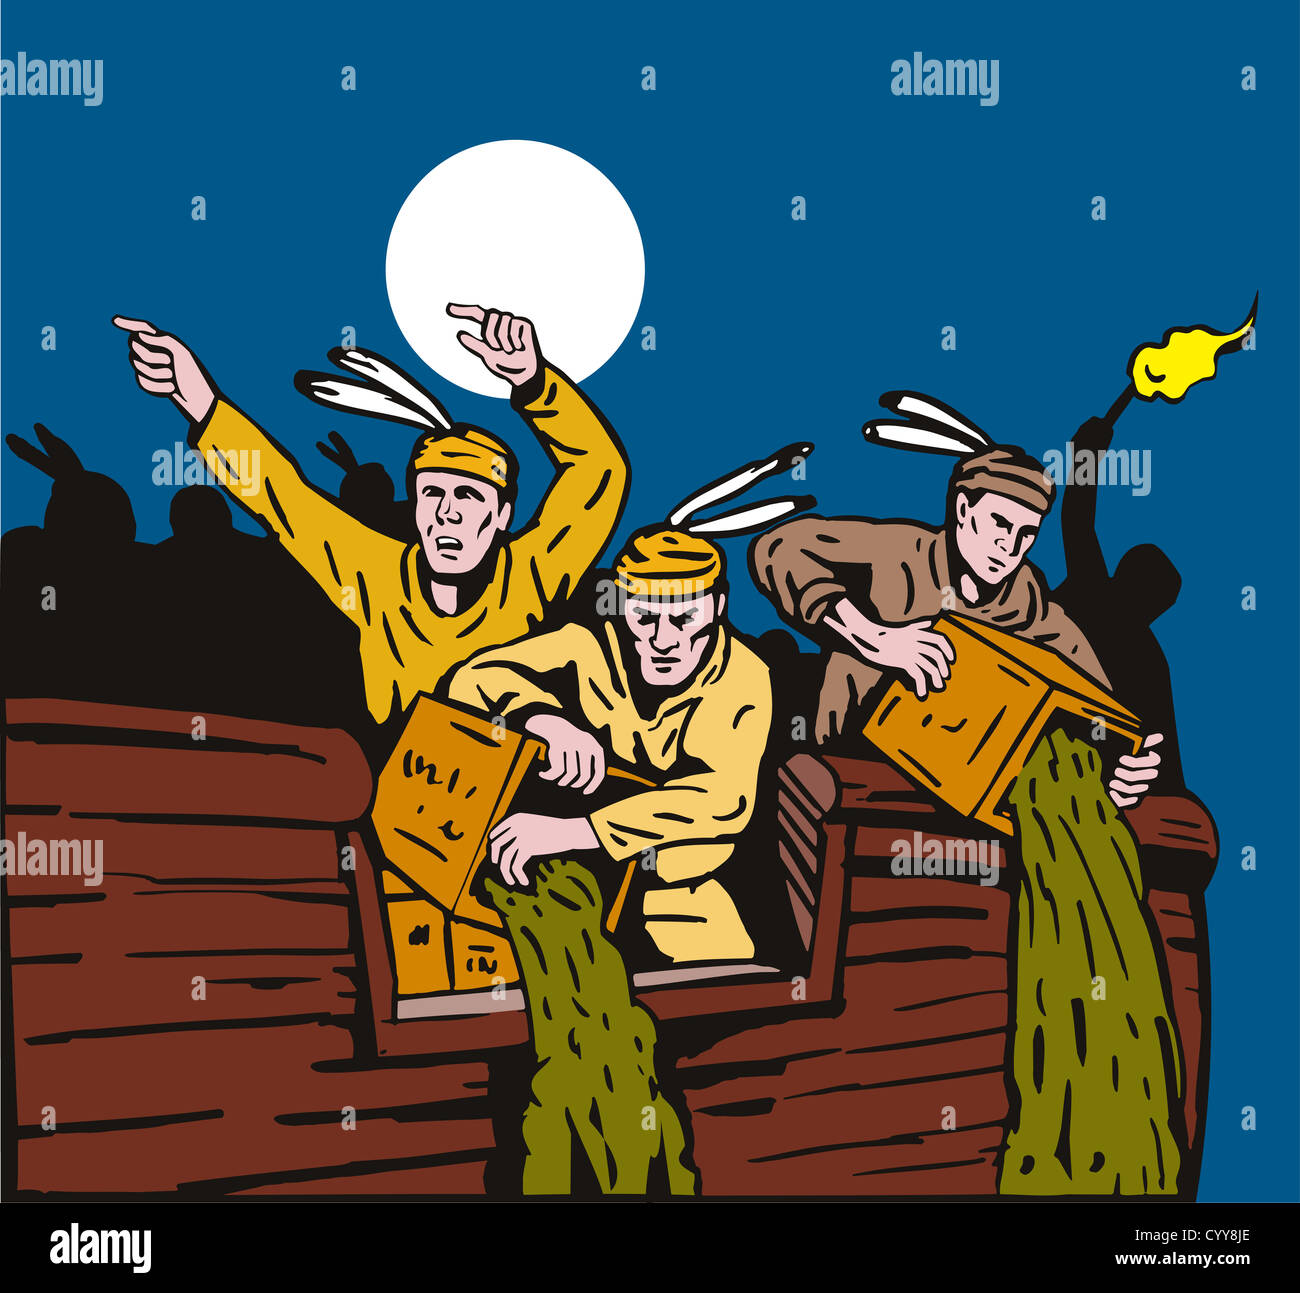 Illustration of the Boston tea party showing American patriots dressed as Native American indians throwing crates of tea overboard the ship. Stock Photo